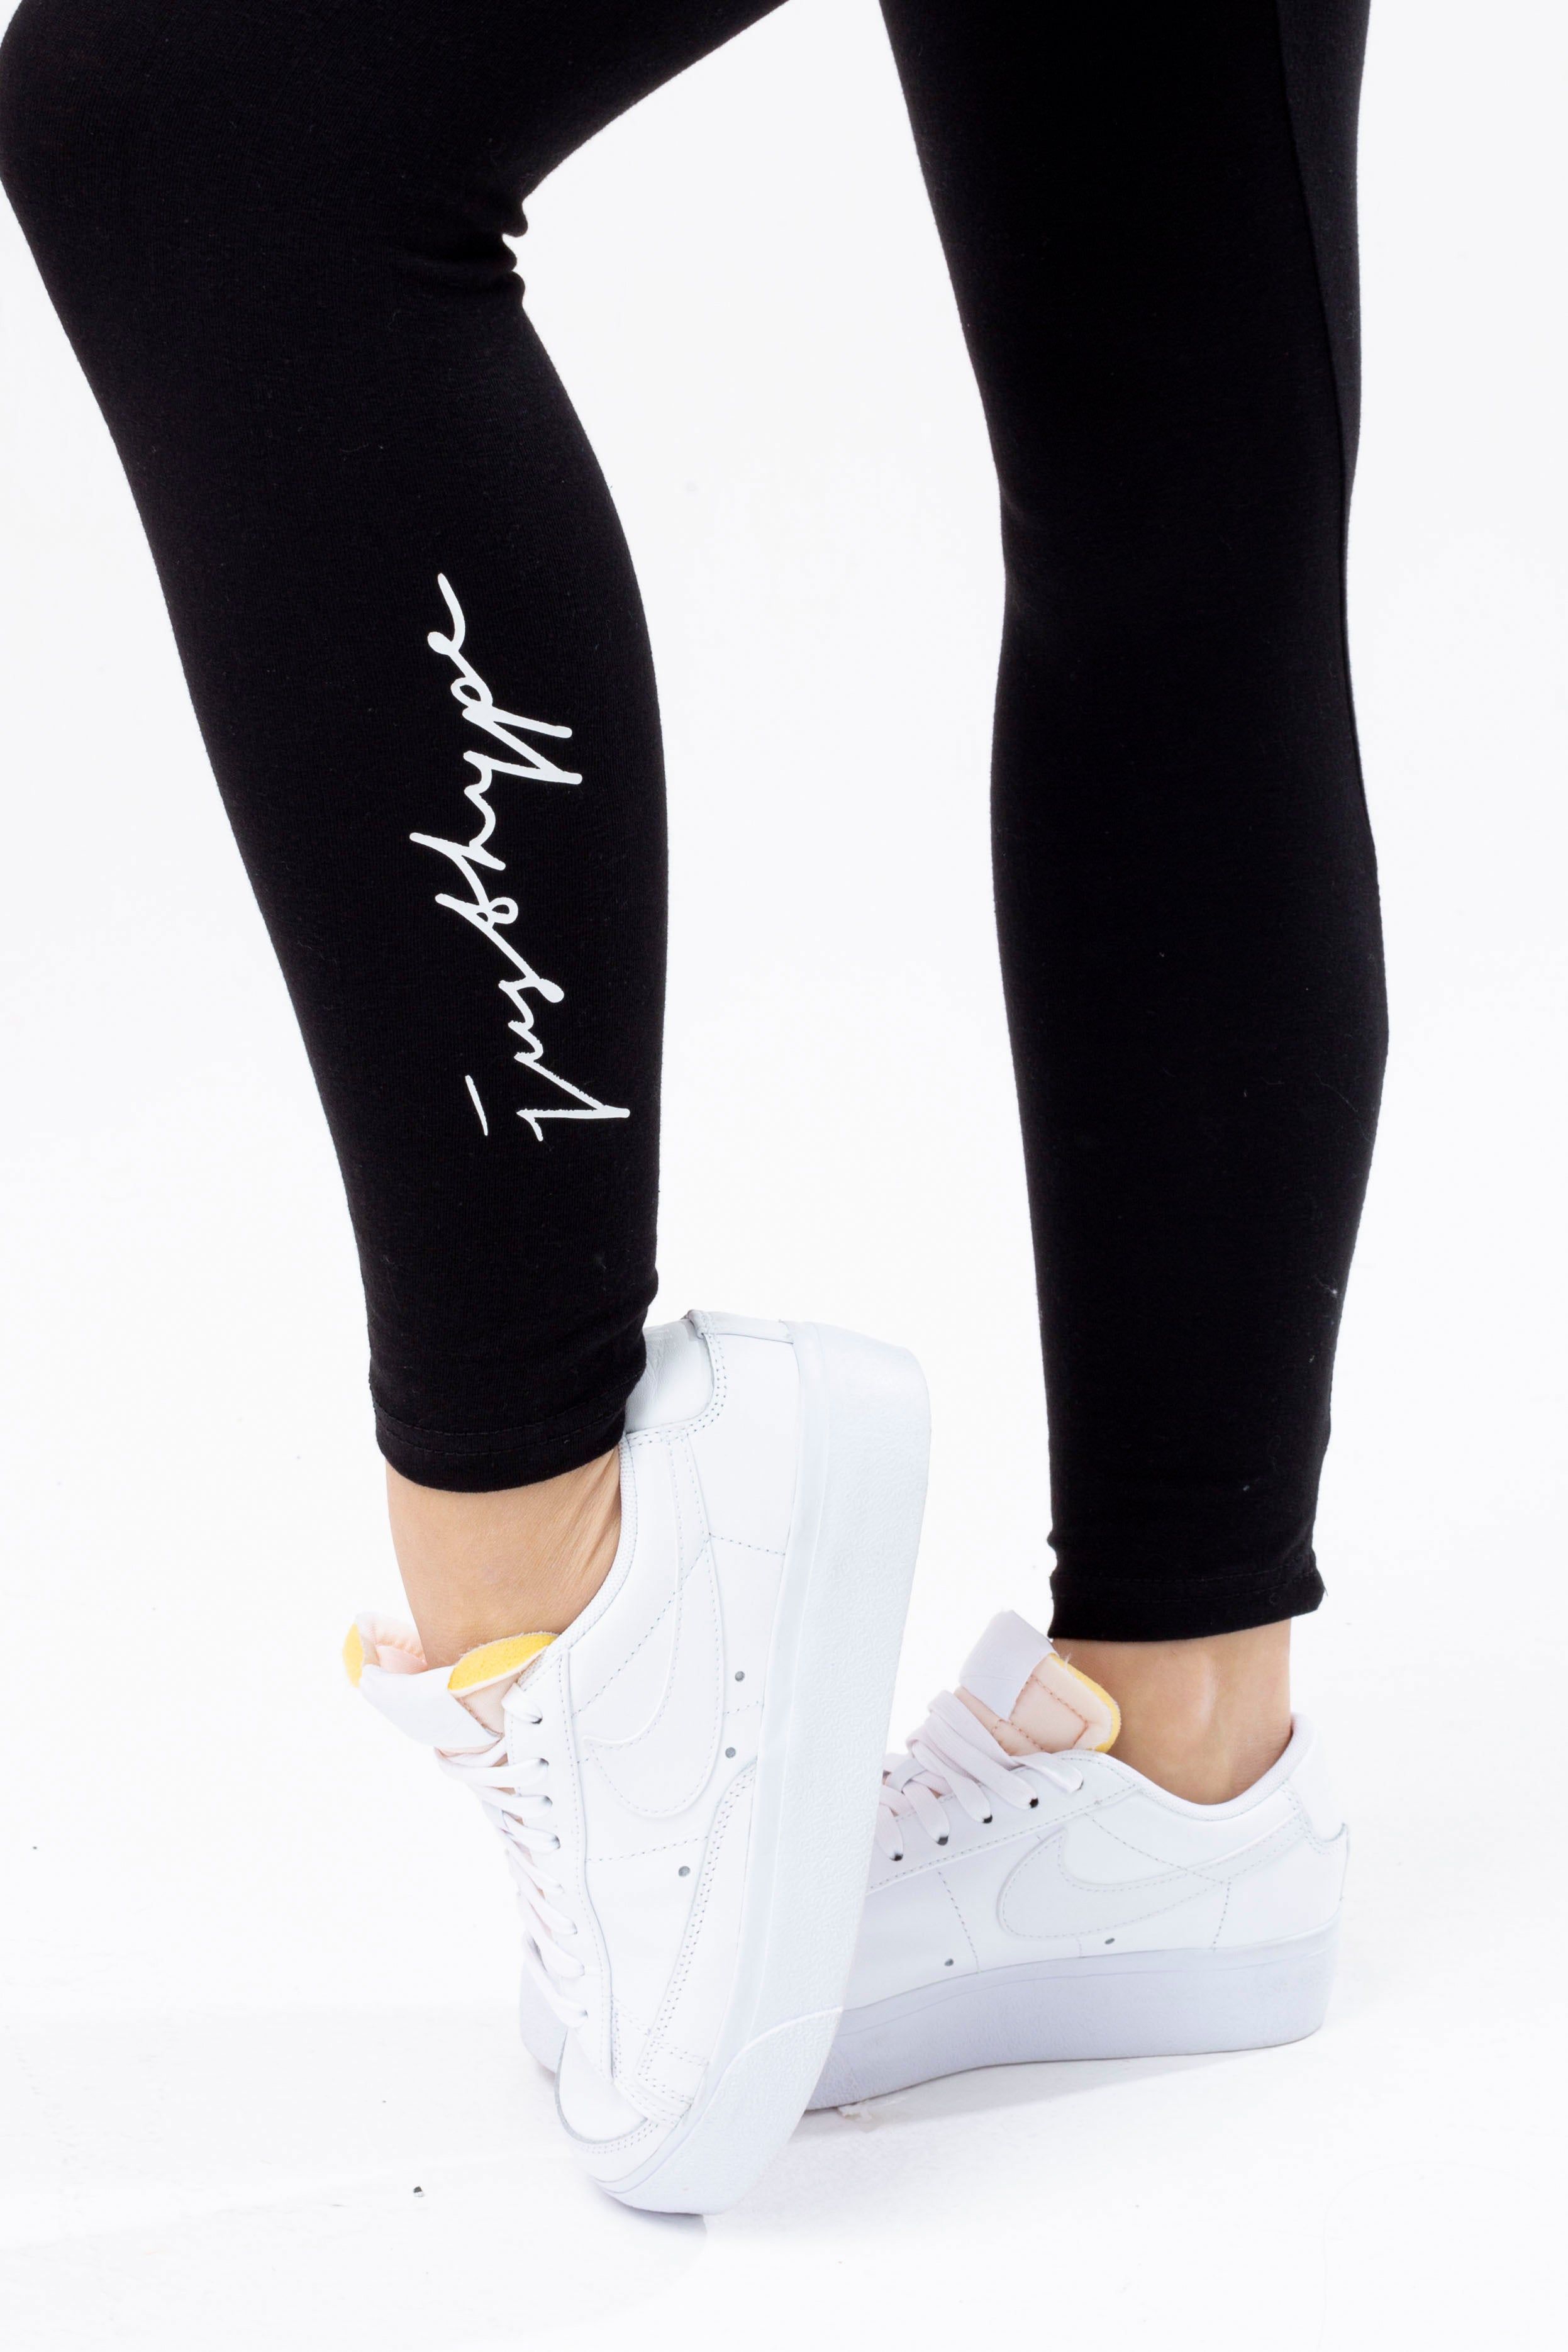 The HYPE. Womens Legging is designed in a micro poly fabric for supreme comfort. An easy everyday go-to! Wear with an over-sized hoodie for a casual everyday fit. Machine wash at 30 degrees.